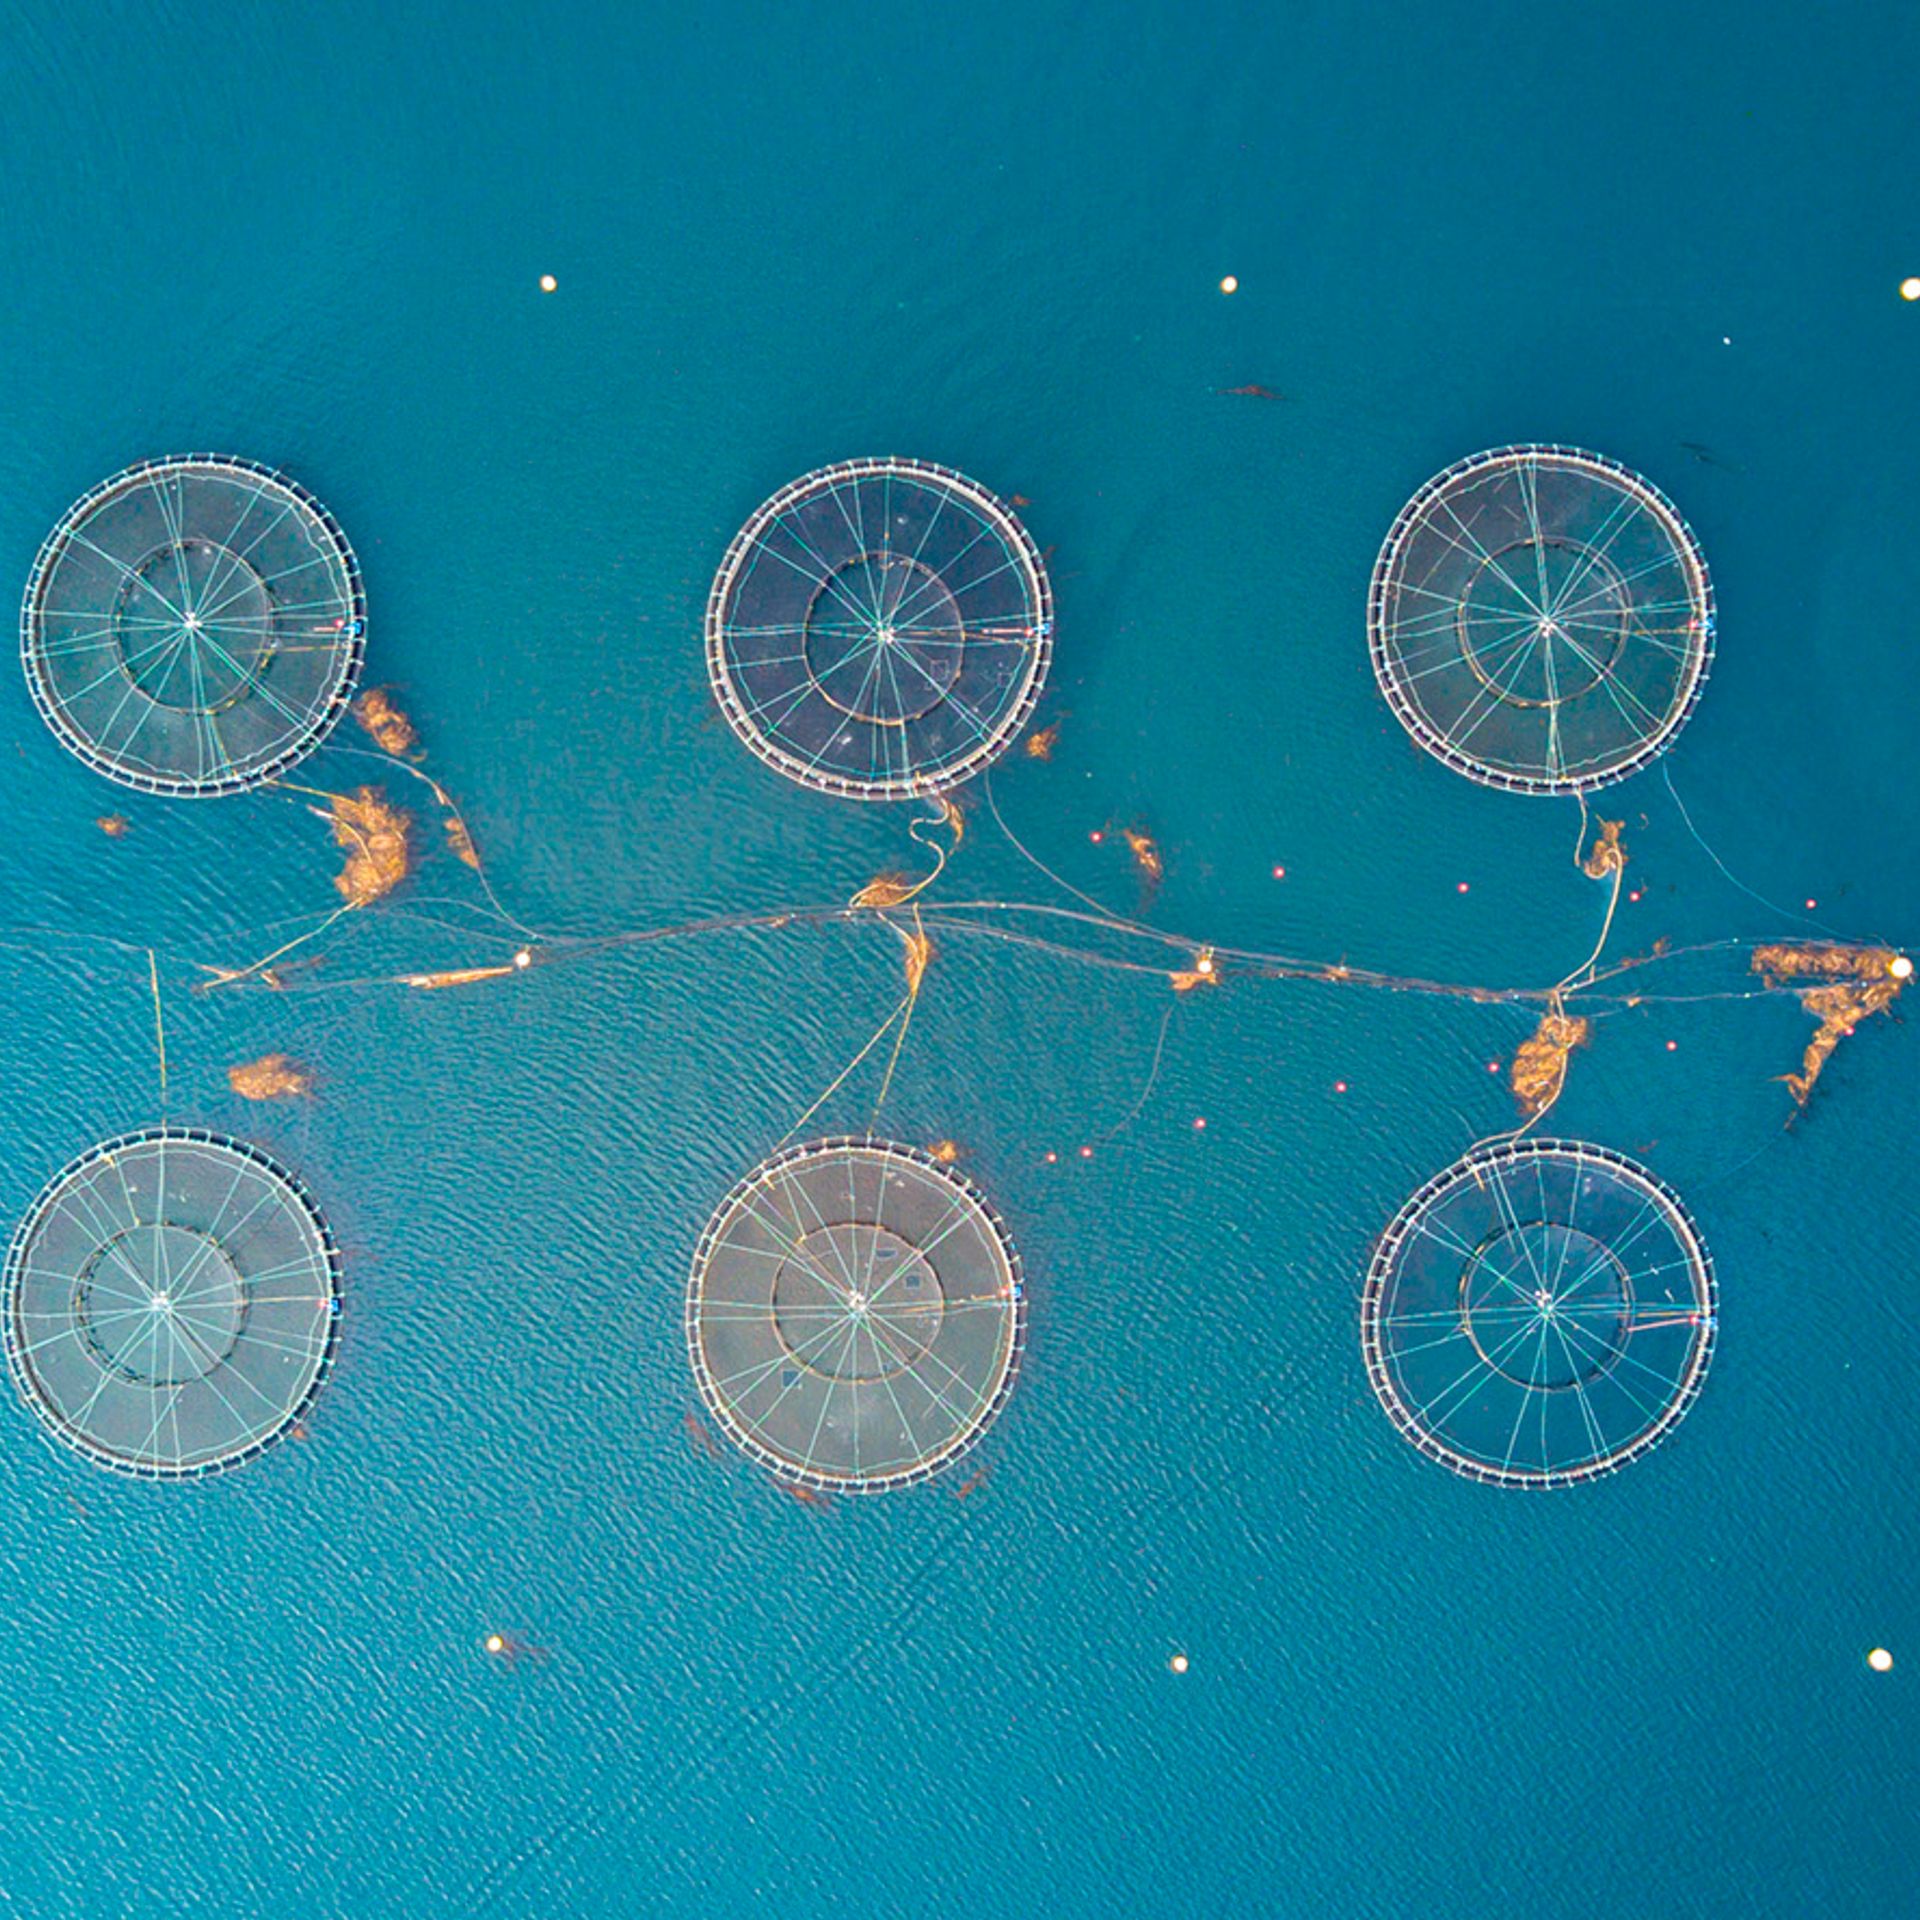 Image of net enclosures from an aquaculture farm from above